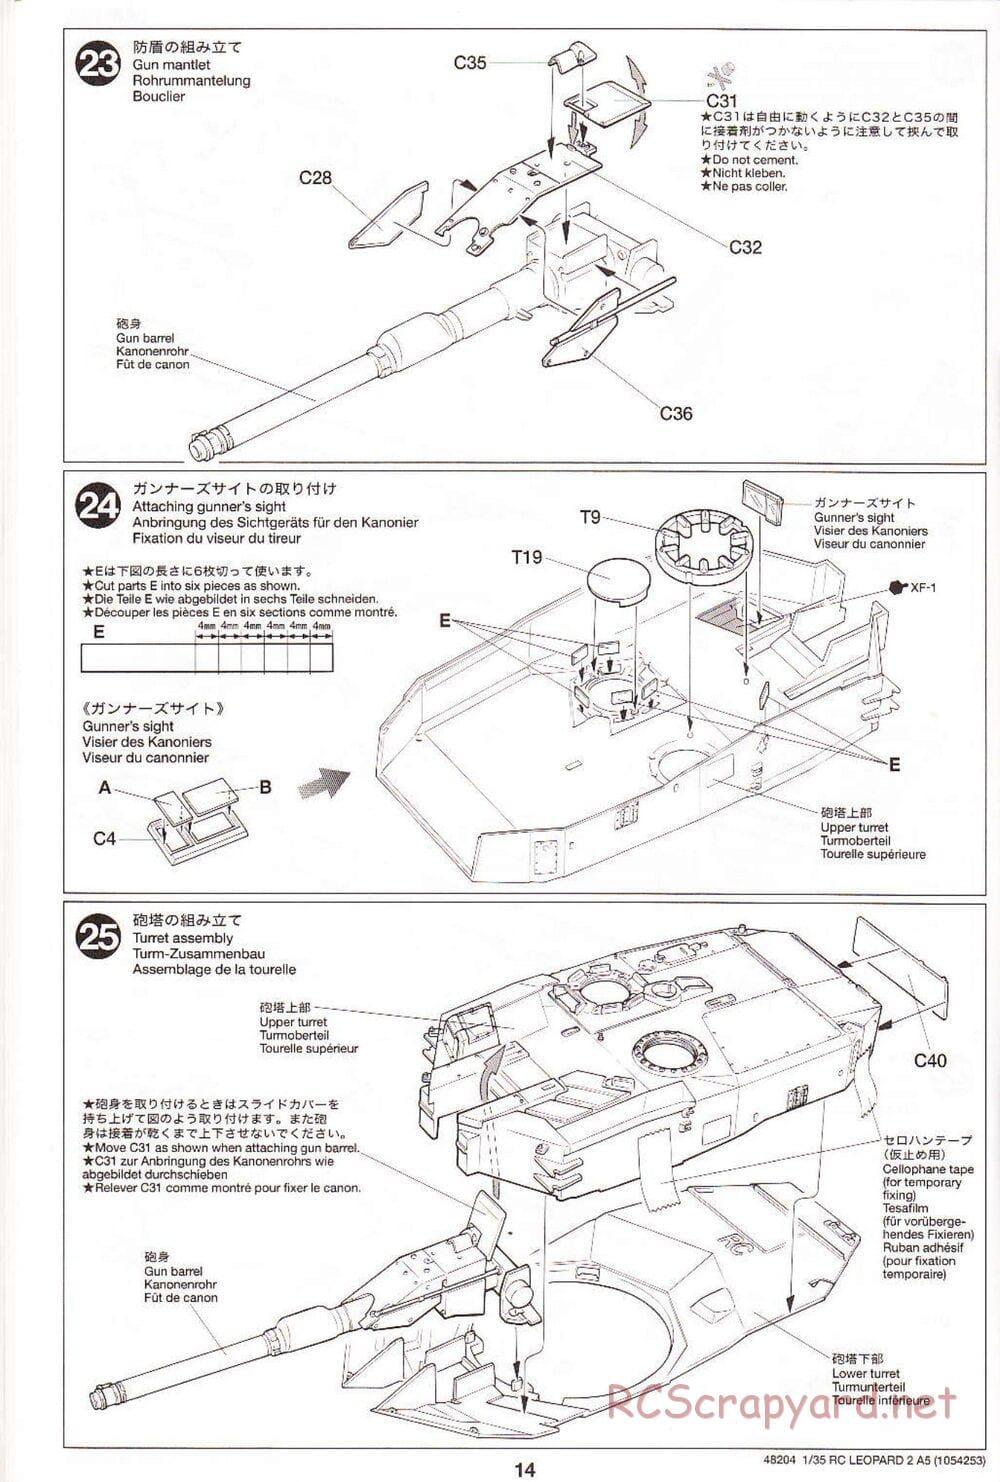 Tamiya - Leopard 2 A5 Main Battle Tank - 1/35 Scale Chassis - Manual - Page 14